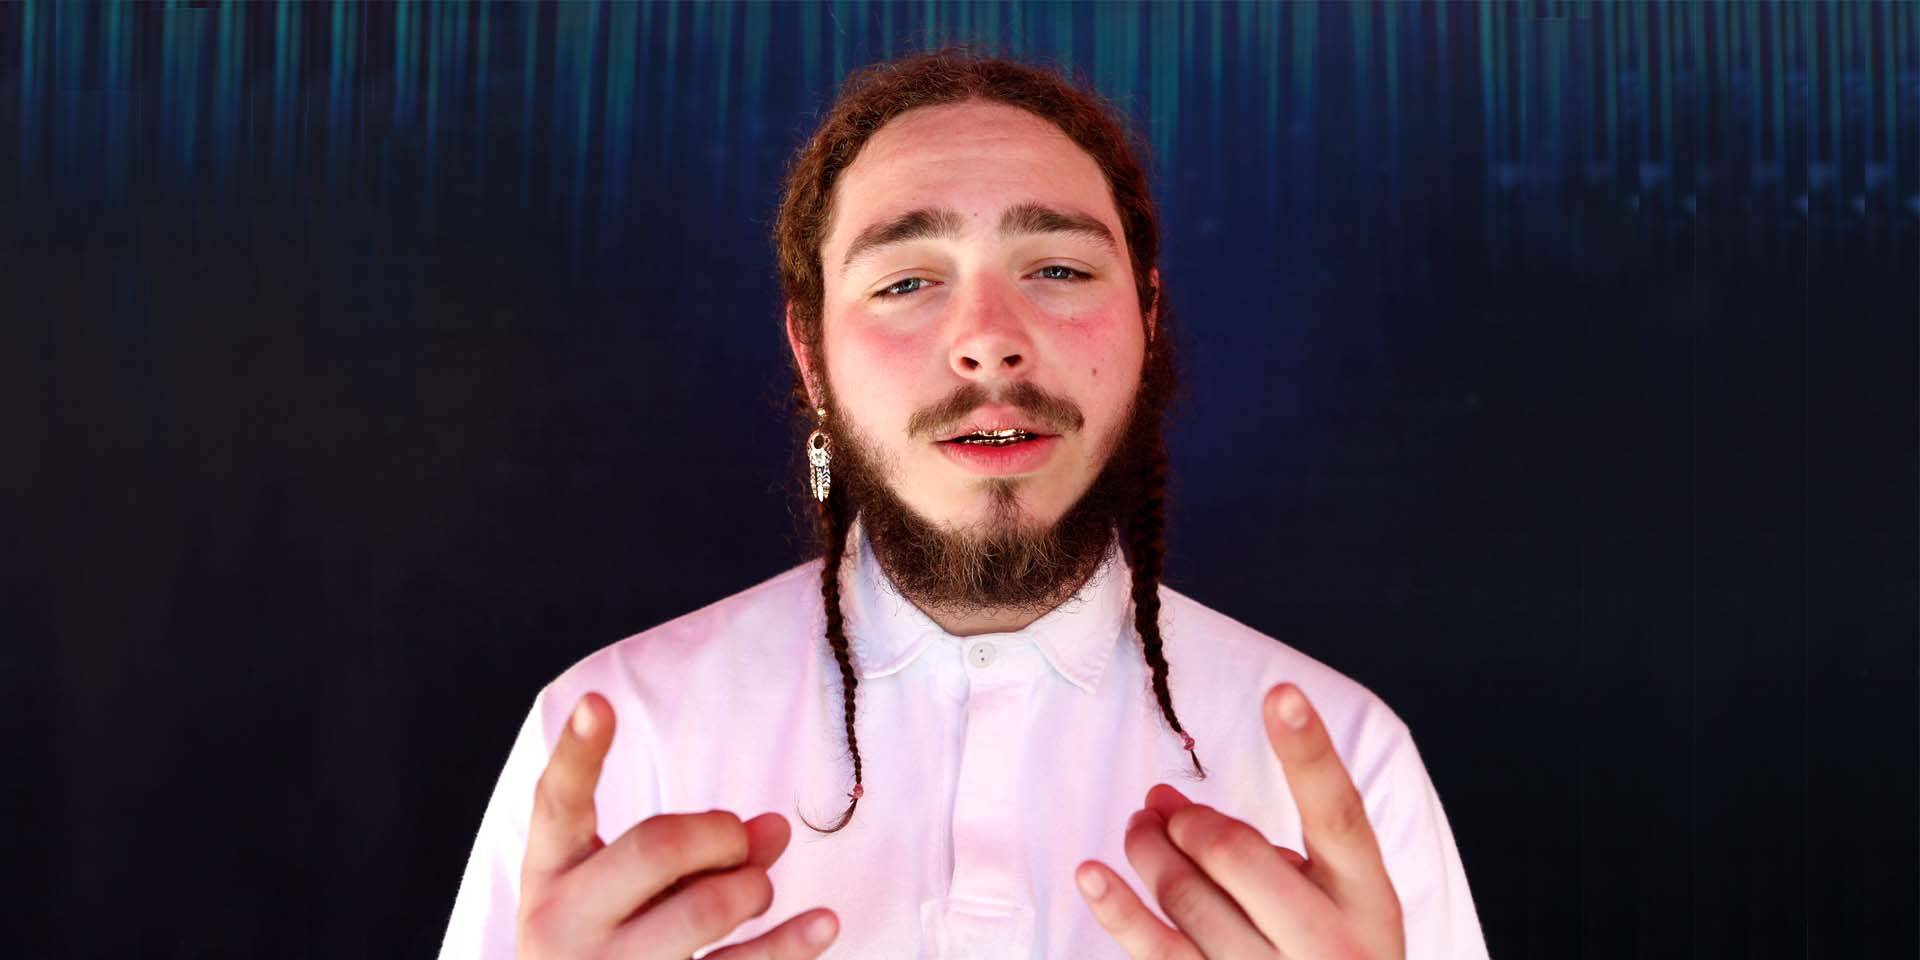 Post Malone Blames Controversial Comments On The Alcohol: 